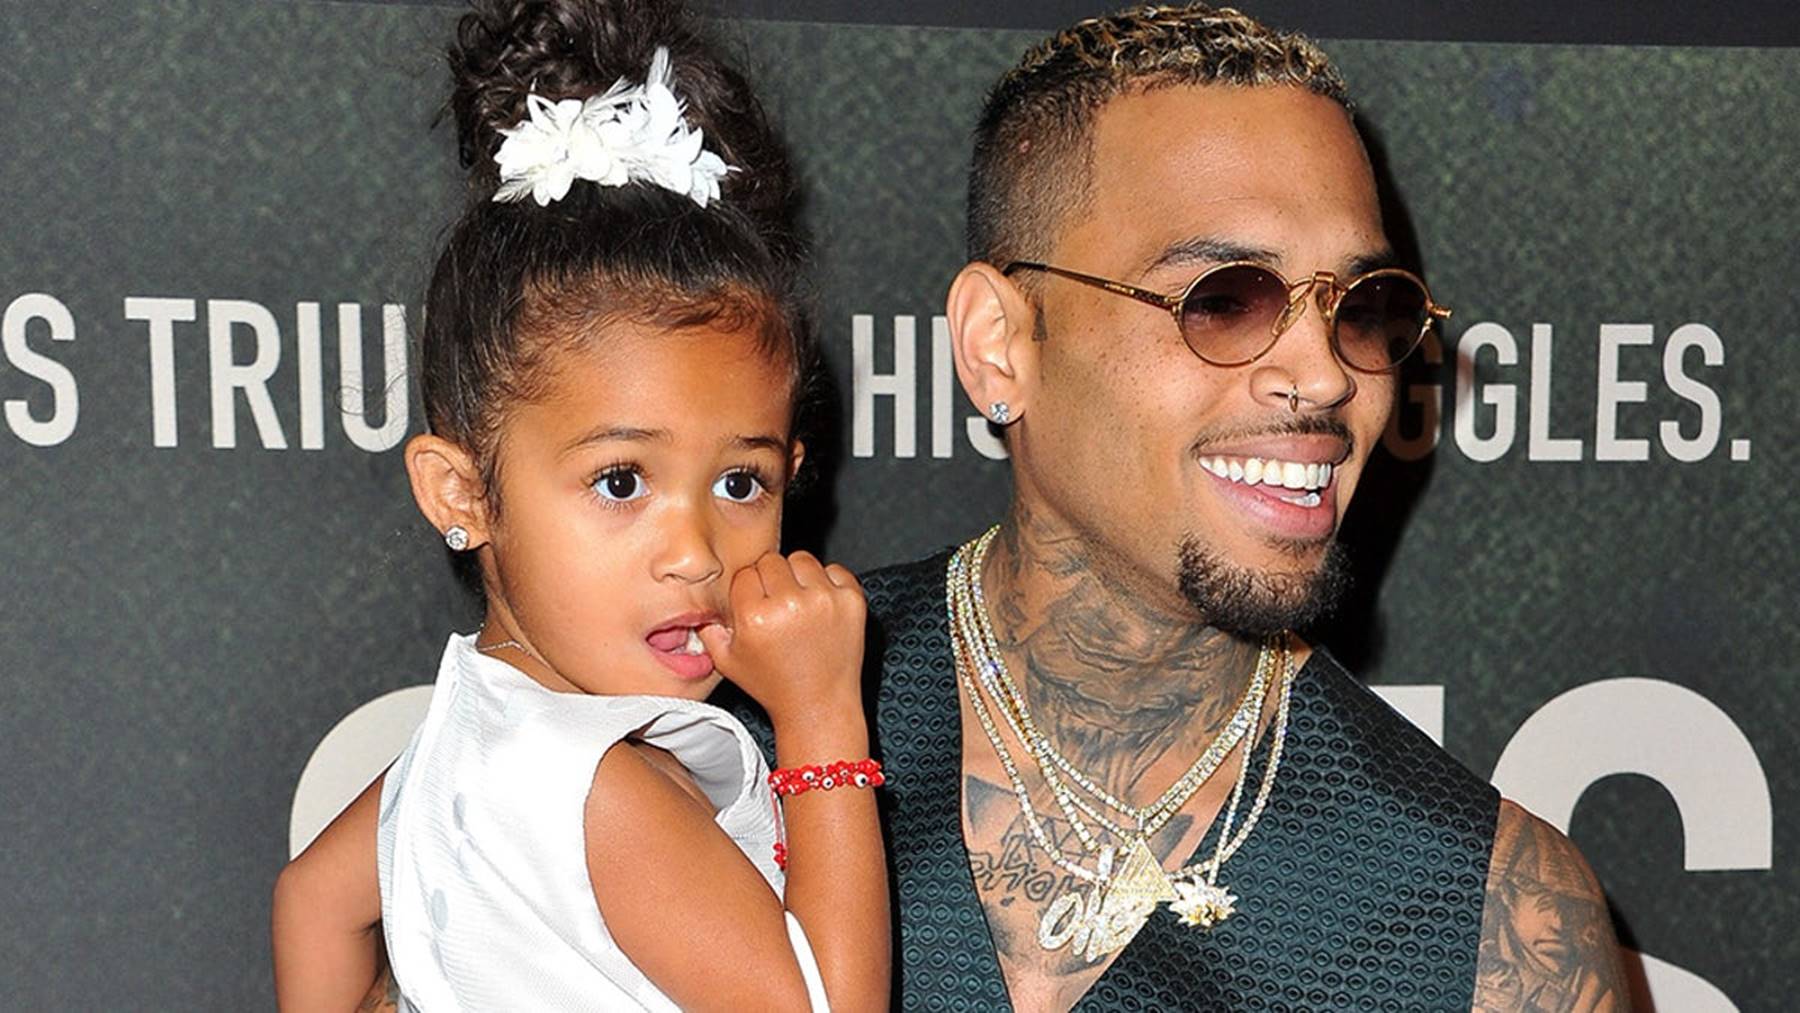 Chris Brown Shares Footage From The Gift Opening Session For Christmas - Check Out Adorable Royalty Brown